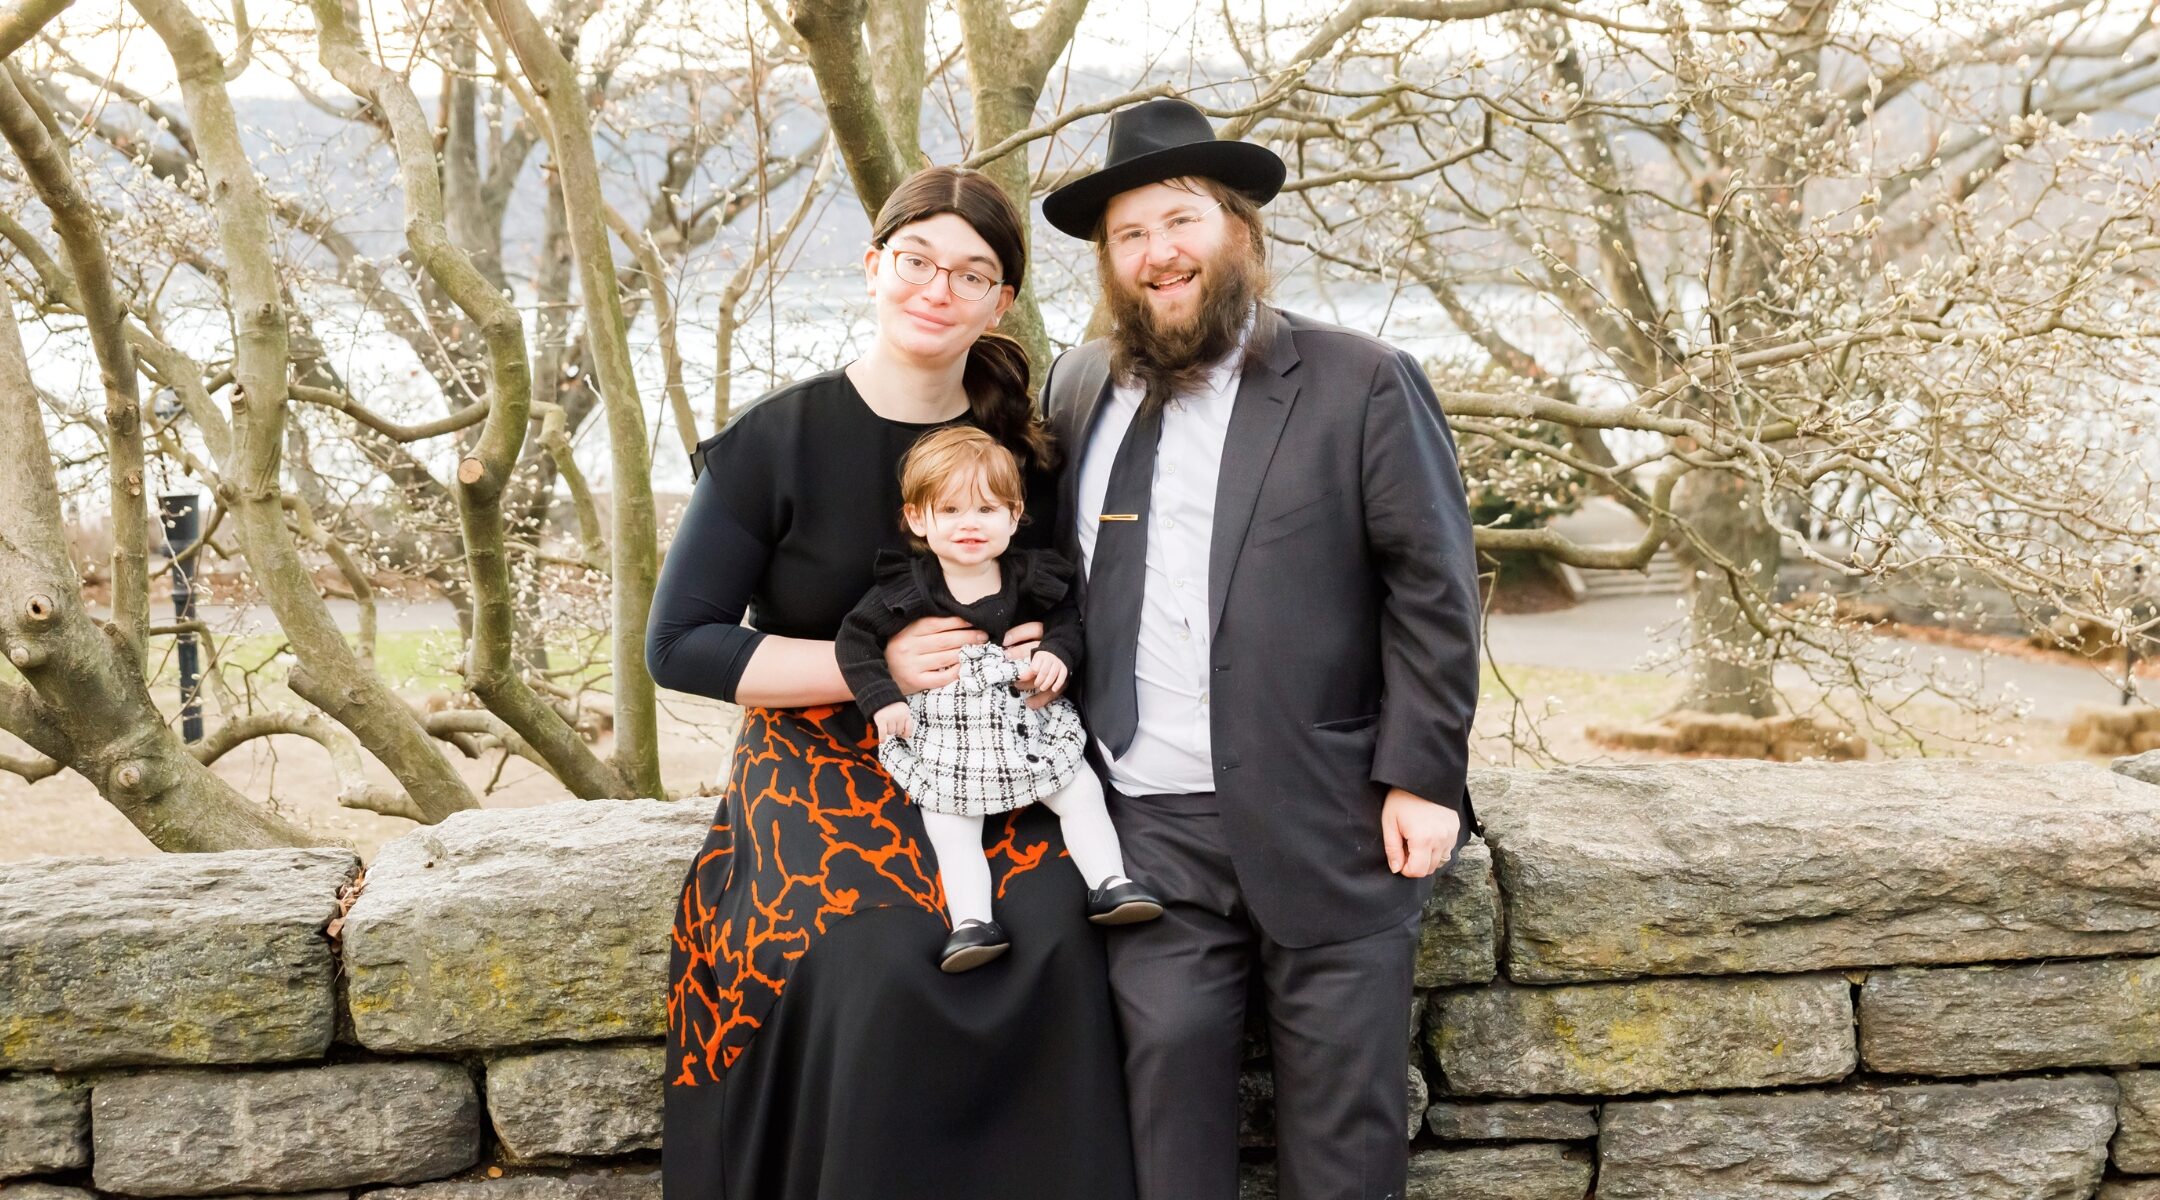 Transgender woman who lost yeshiva job is excluded from YU-affiliated Orthodox synagogue photo